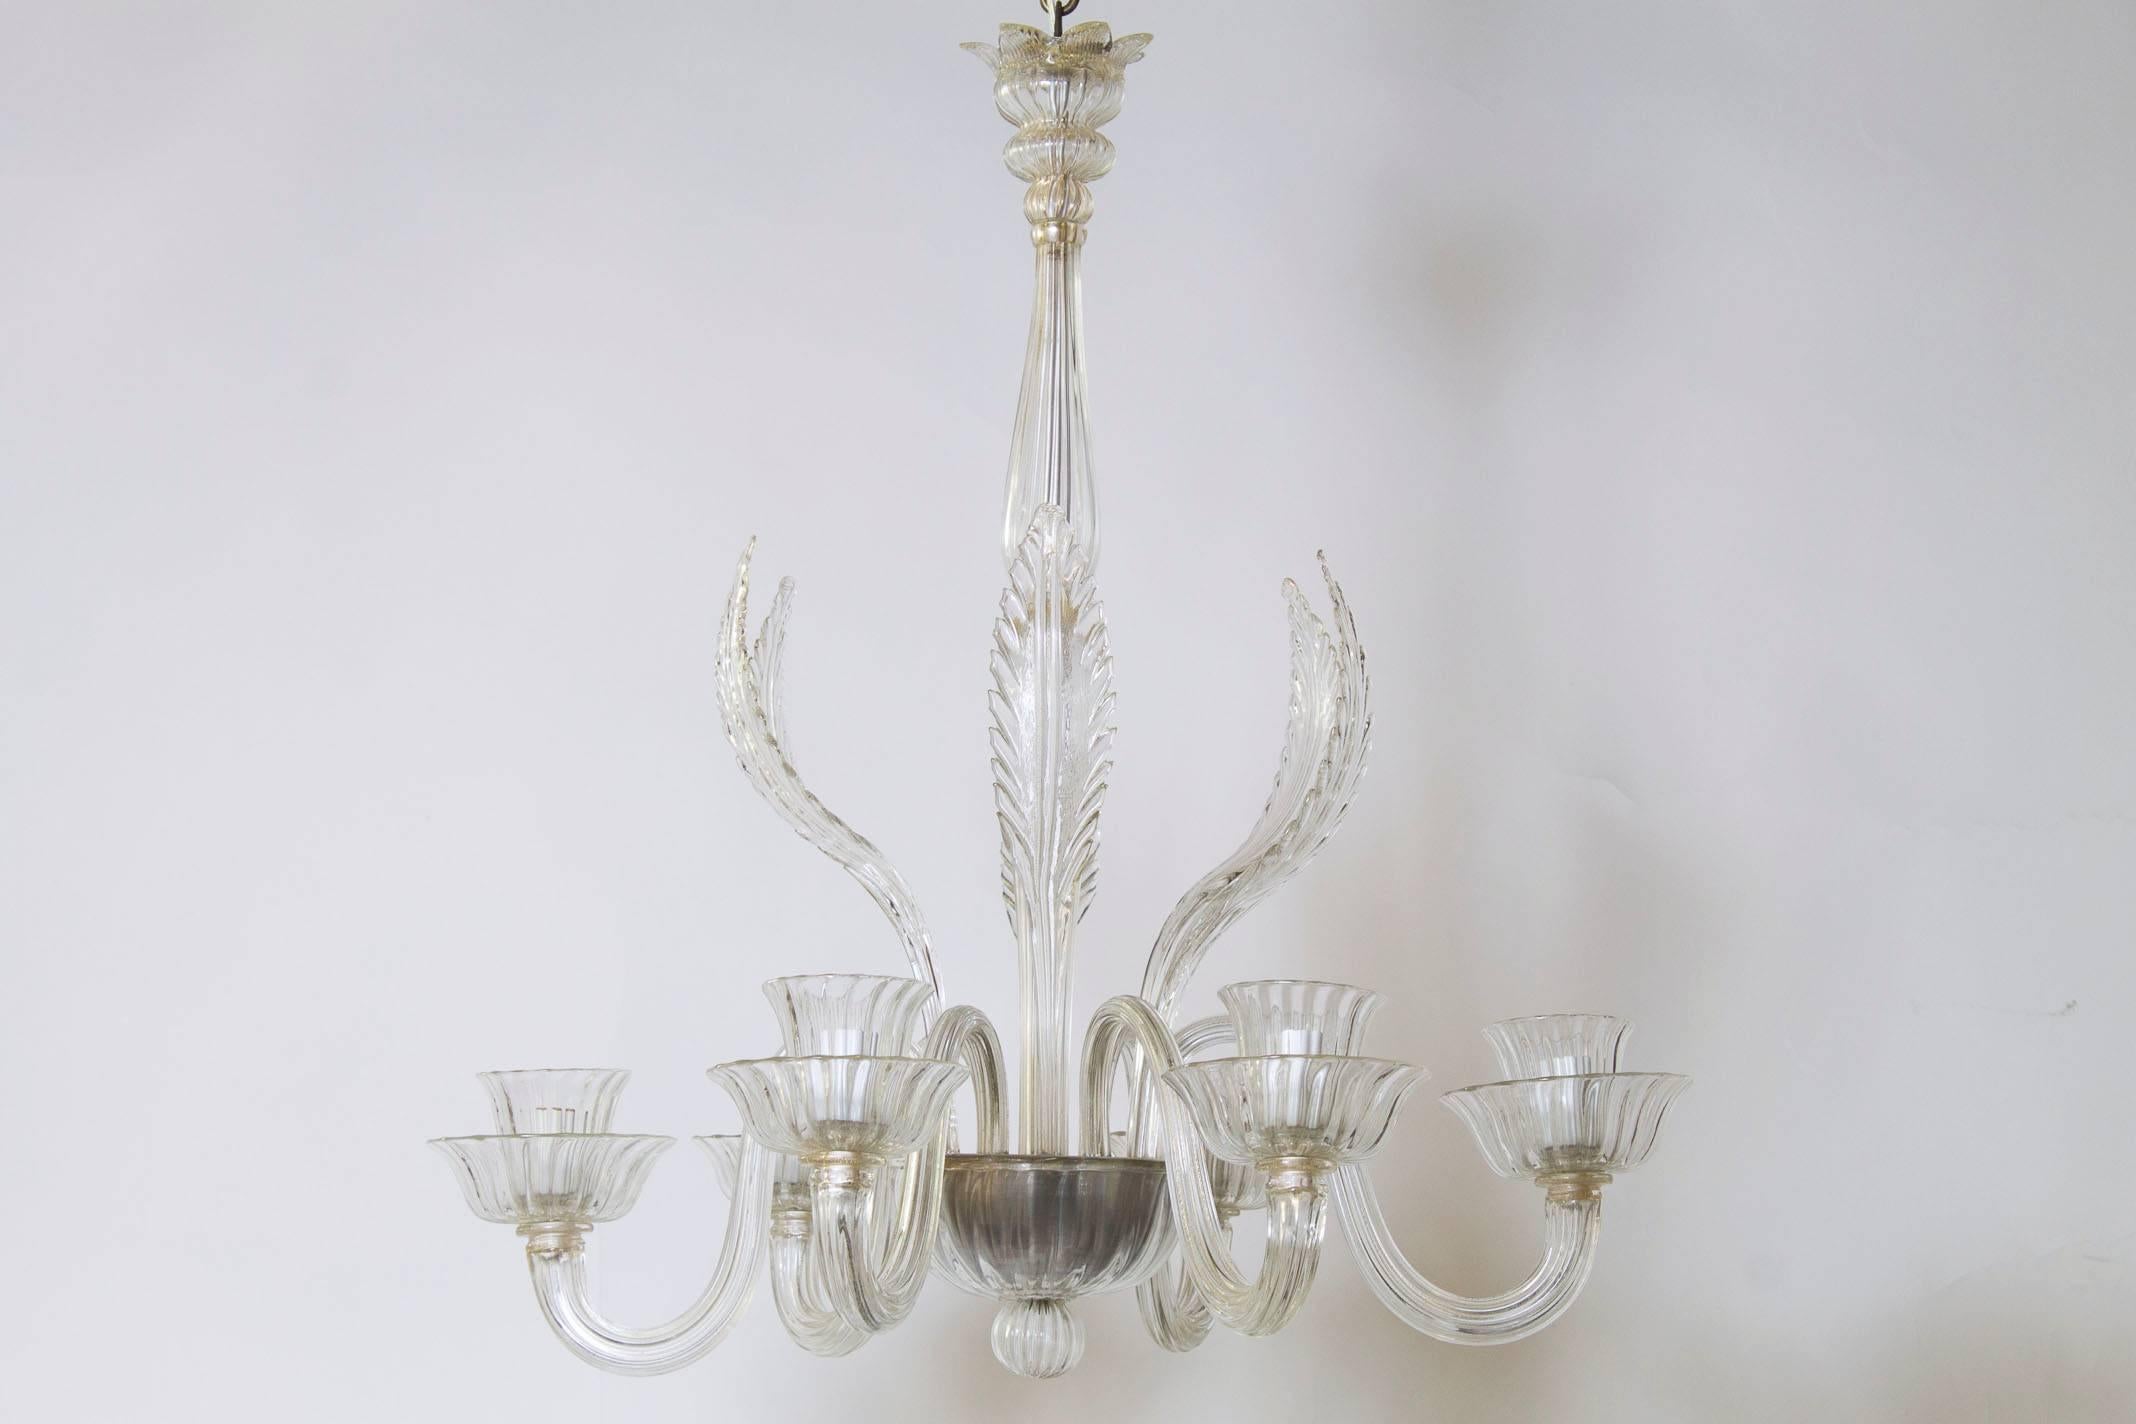 A traditional clear Murano chandelier, circa 1940.

Features six chandelier arms, six decorative glass feathers and a glass canopy with hints of soft gold.